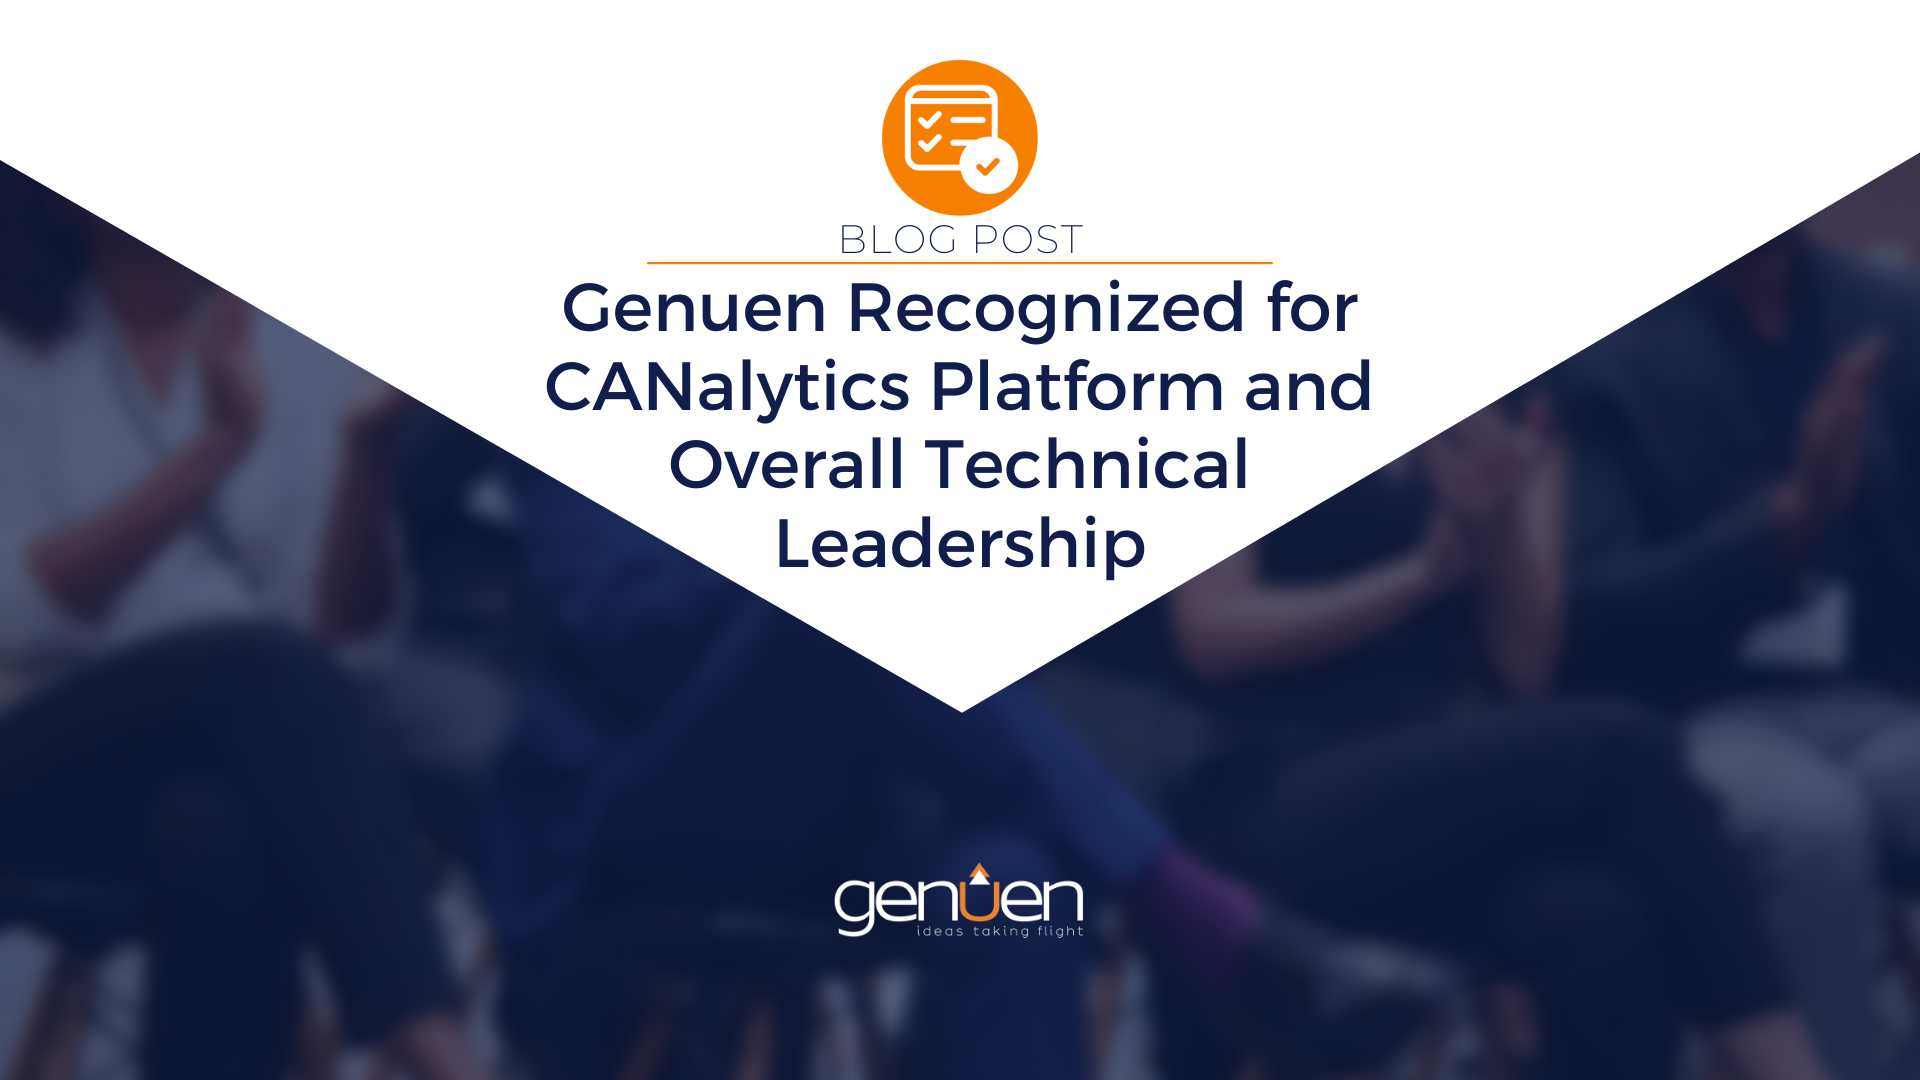 Genuen Recognized for CANalytics Platform and Overall Technical Leadership